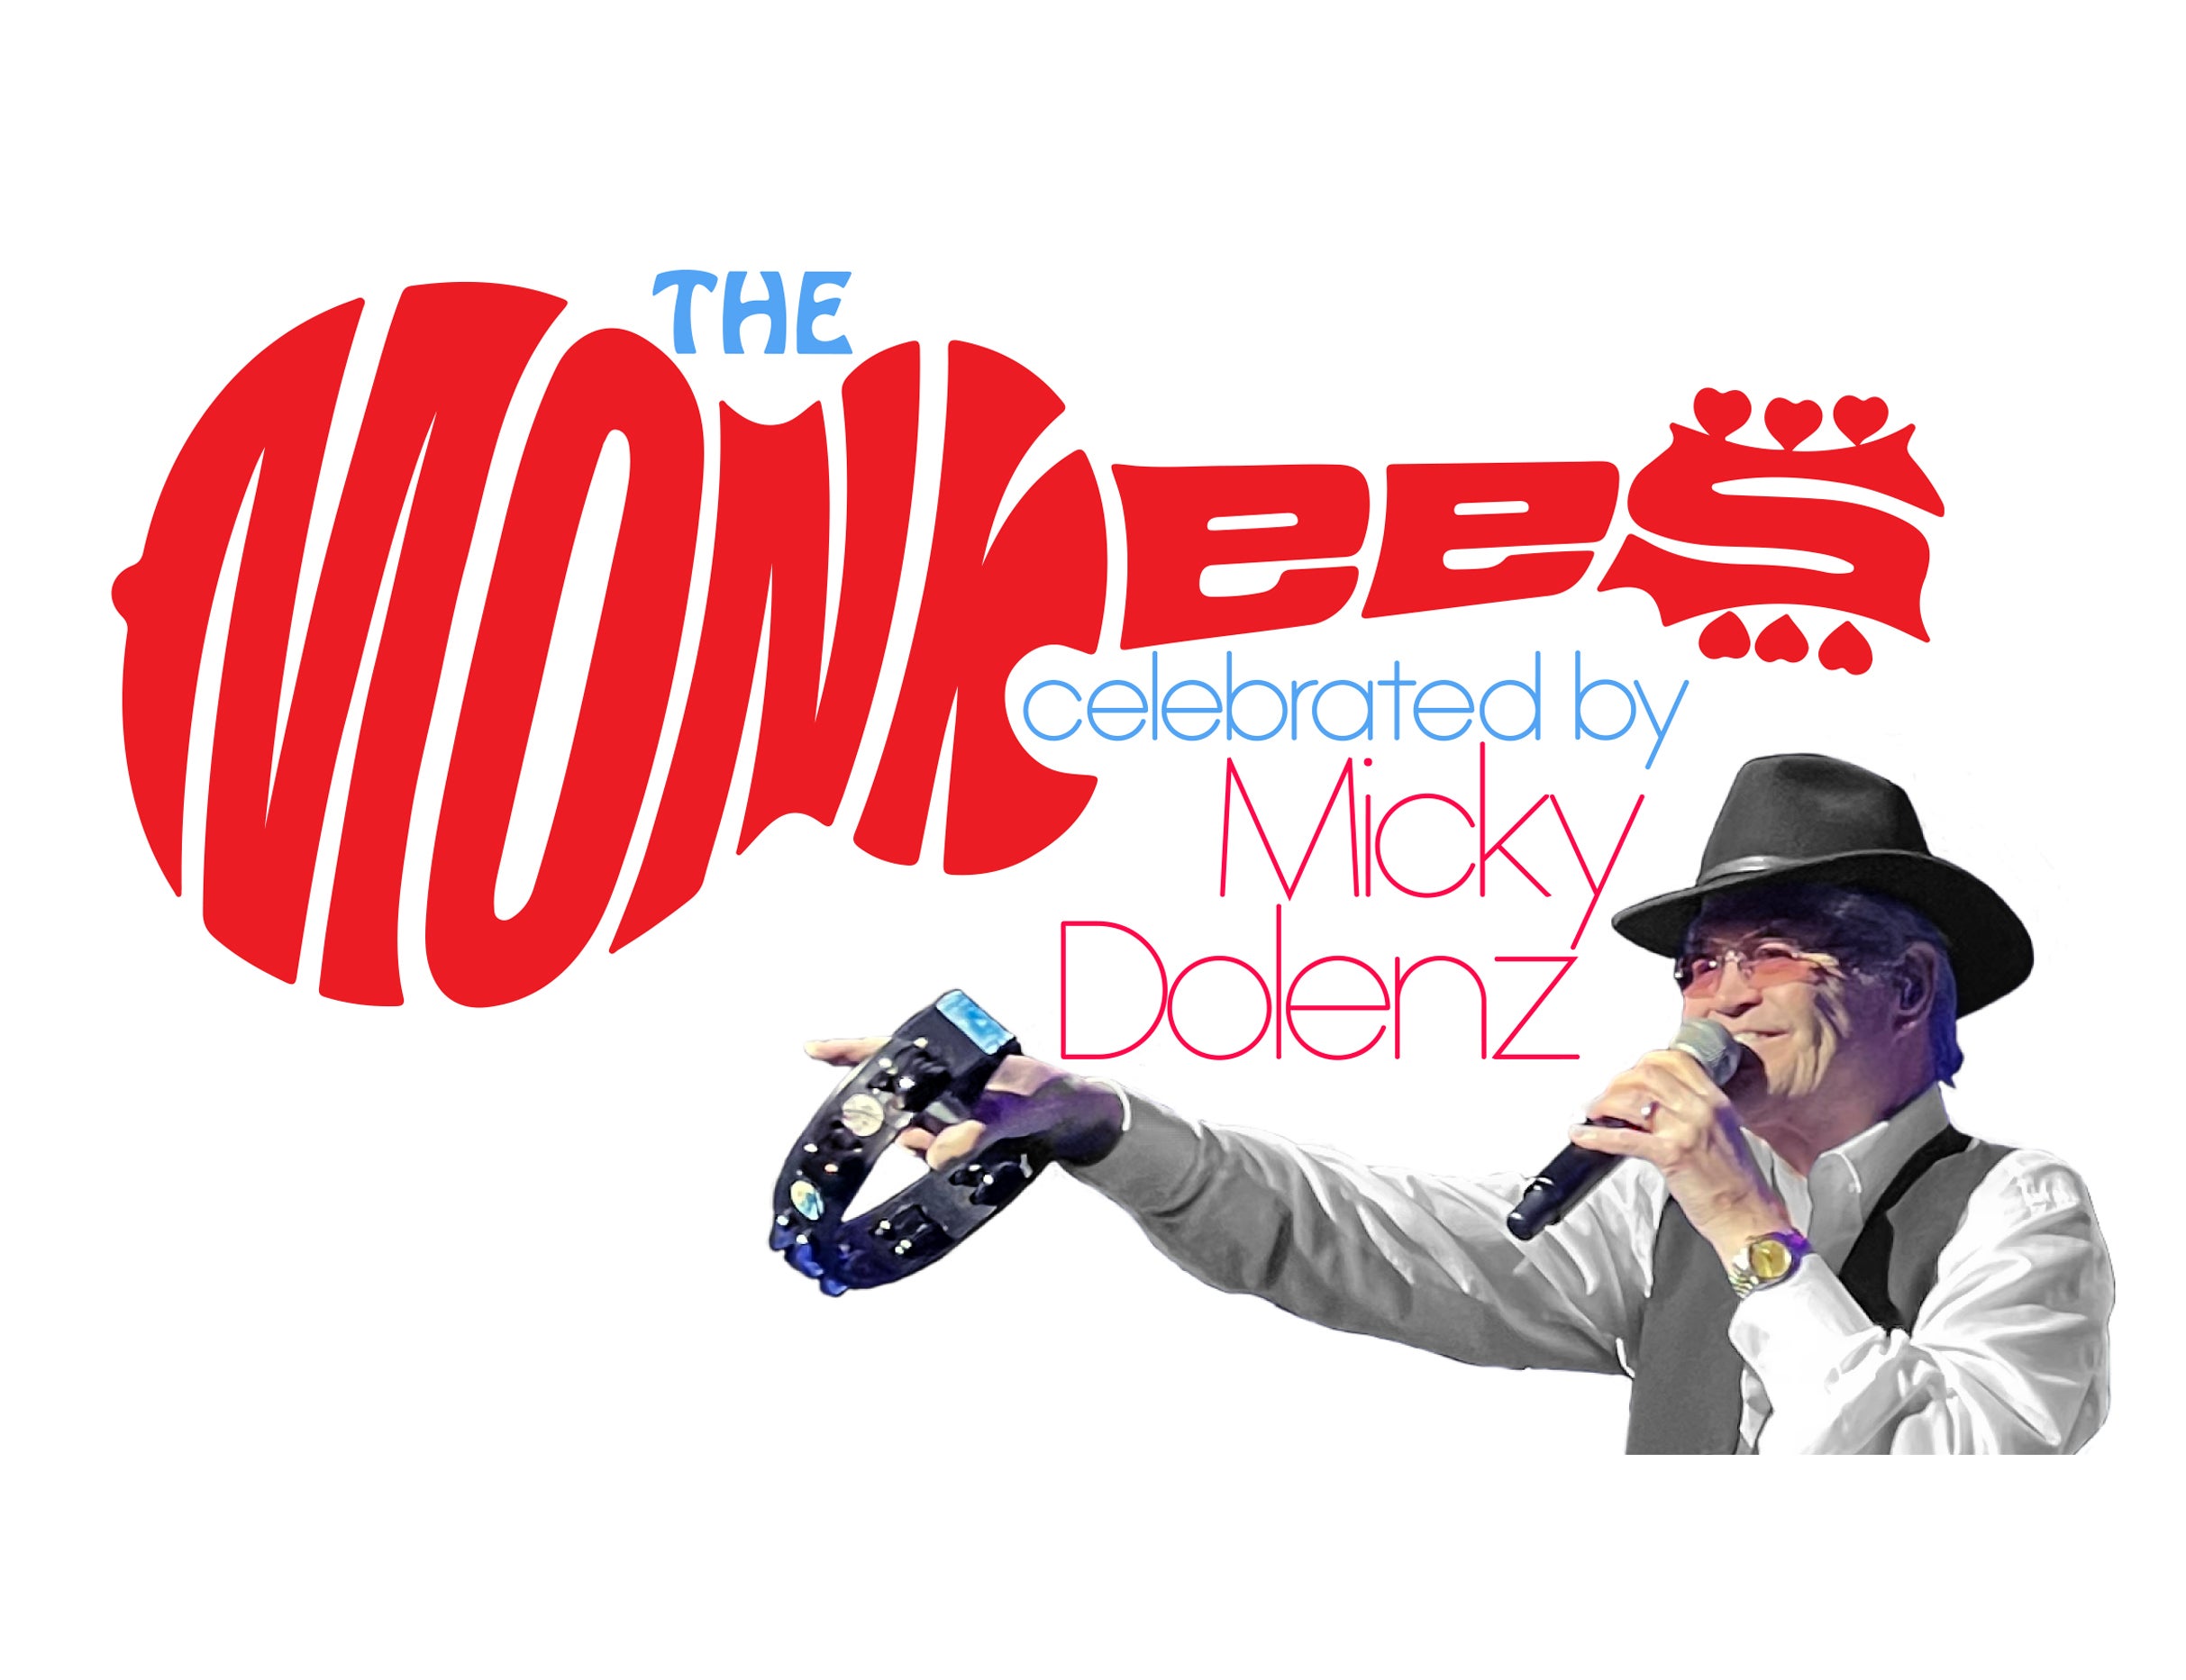 The Monkees Celebrated By Micky Dolenz in Englewood promo photo for Vip Package Onsale presale offer code